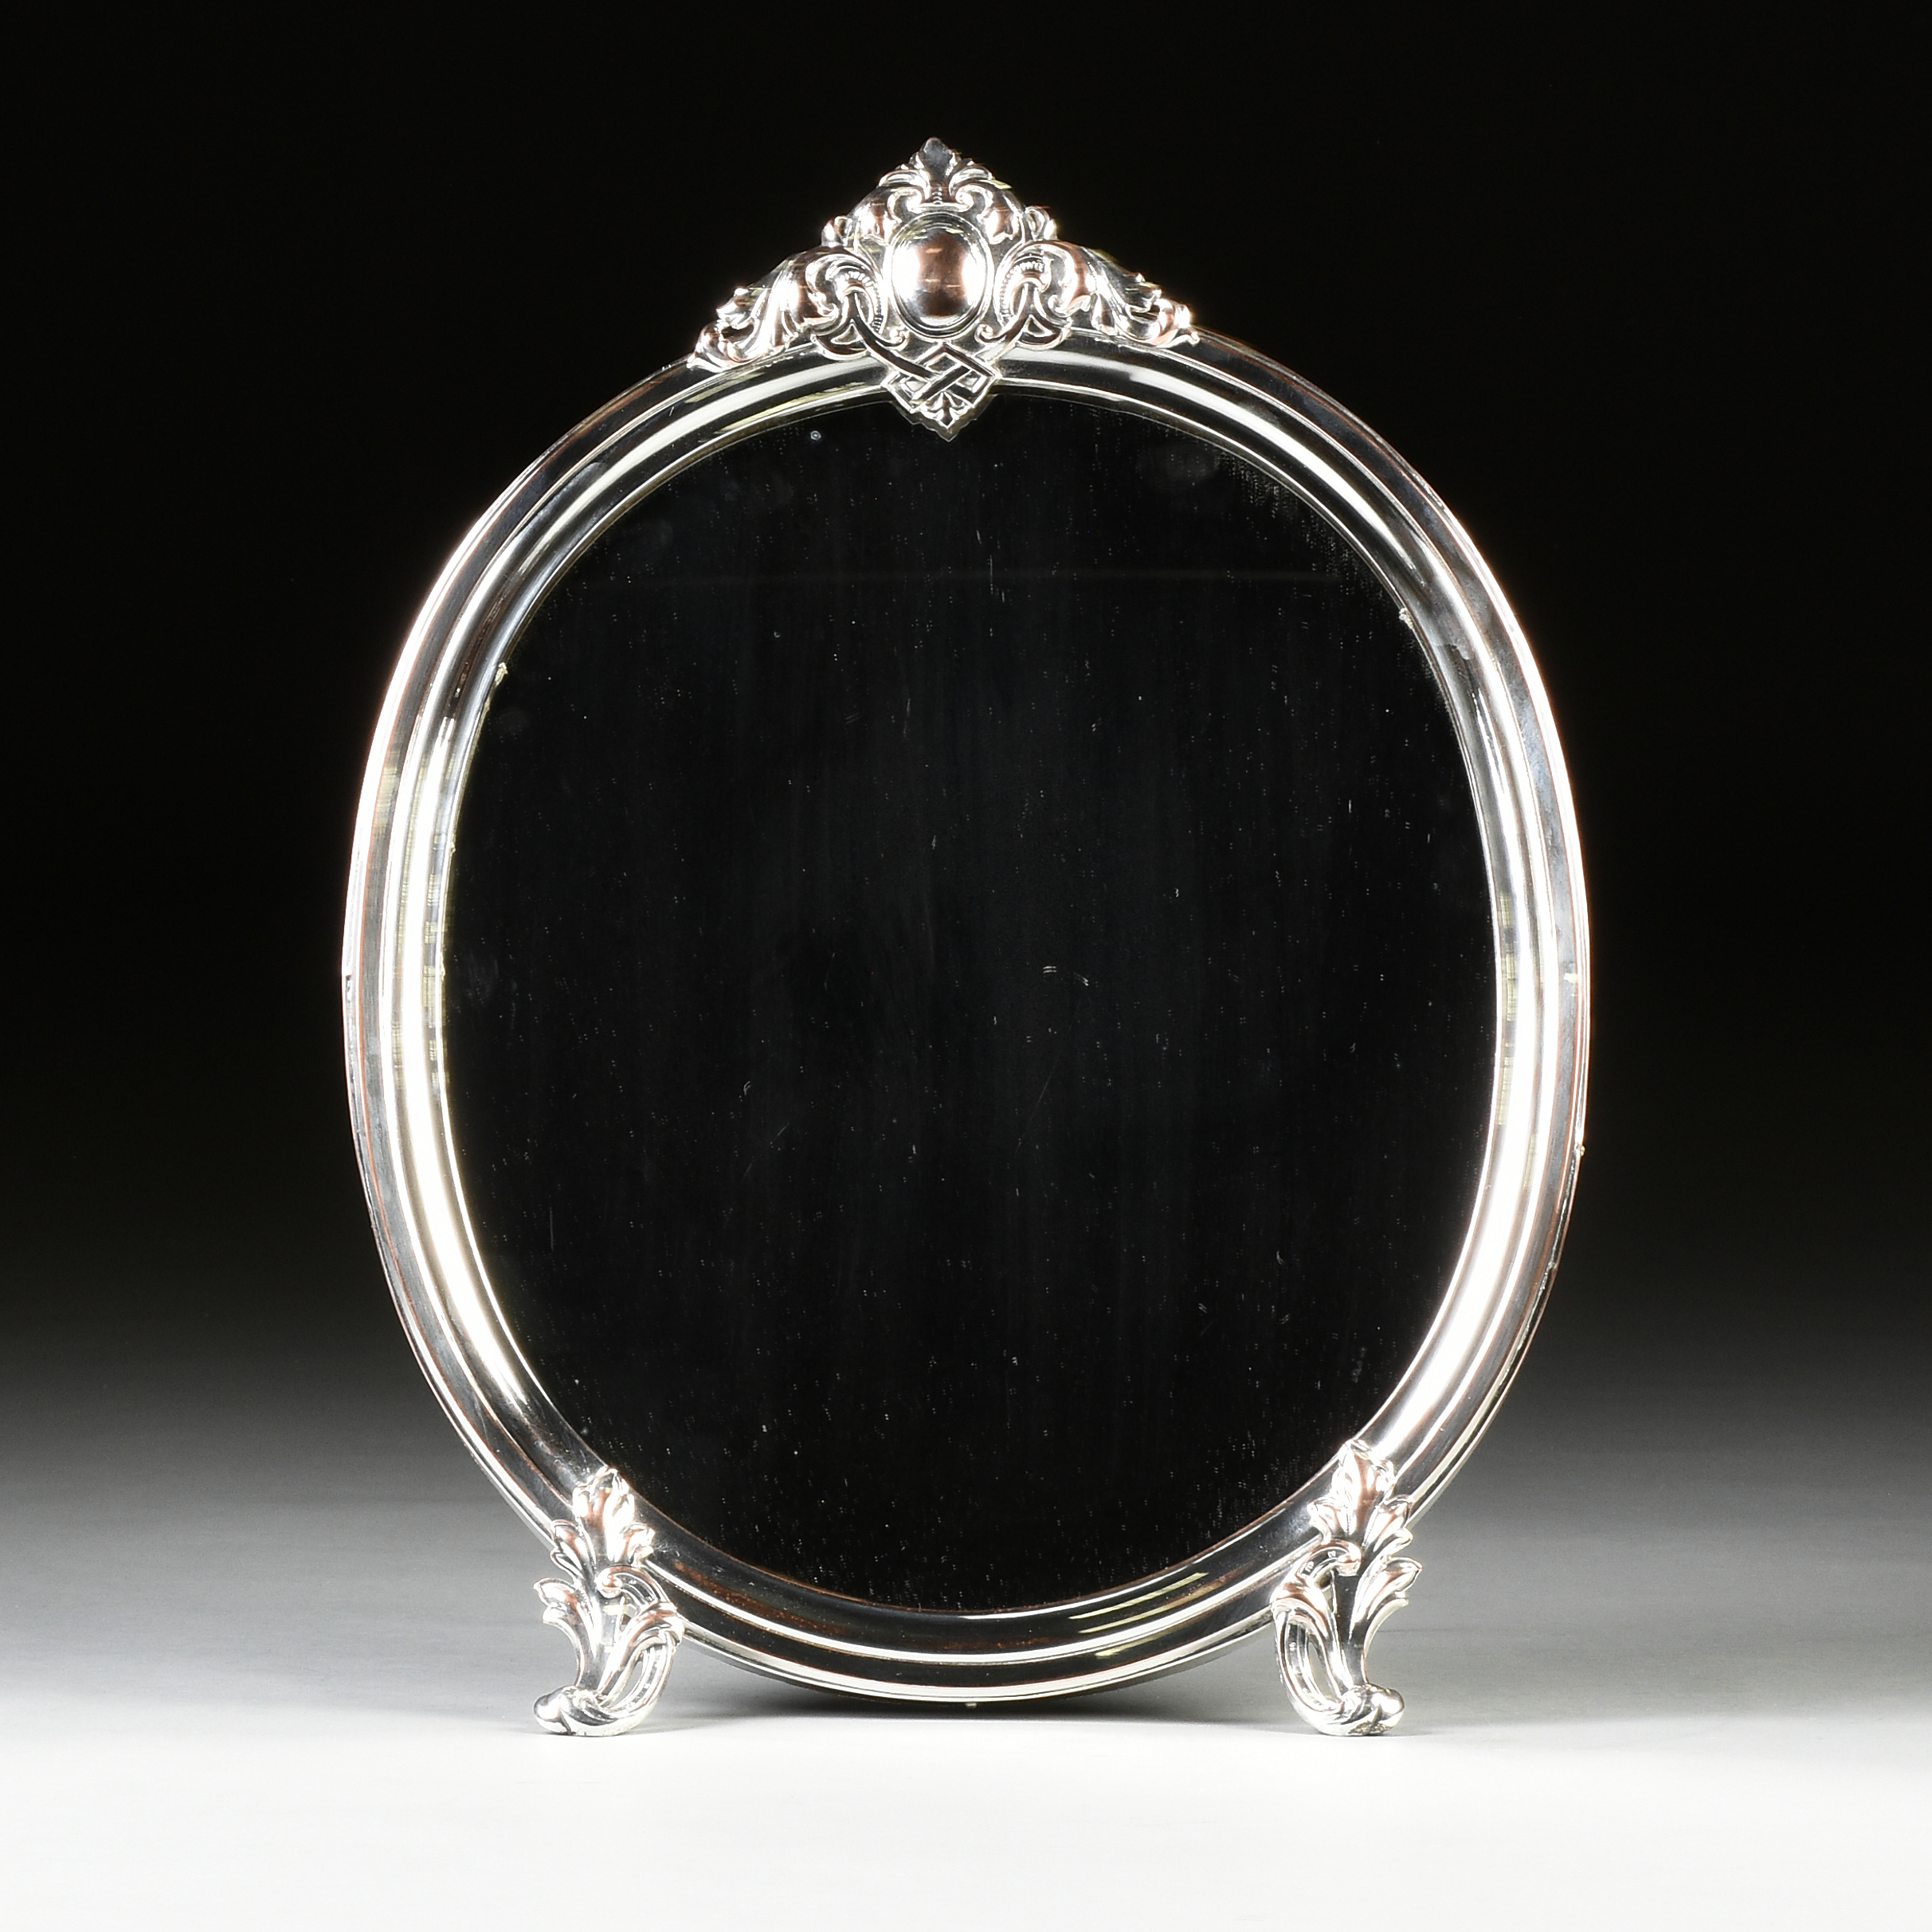 A ROCOCO REVIVAL SILVERPLATED TABLE TOP MIRROR, POSSIBLY ENGLISH, LATE 19TH CENTURY, the oval